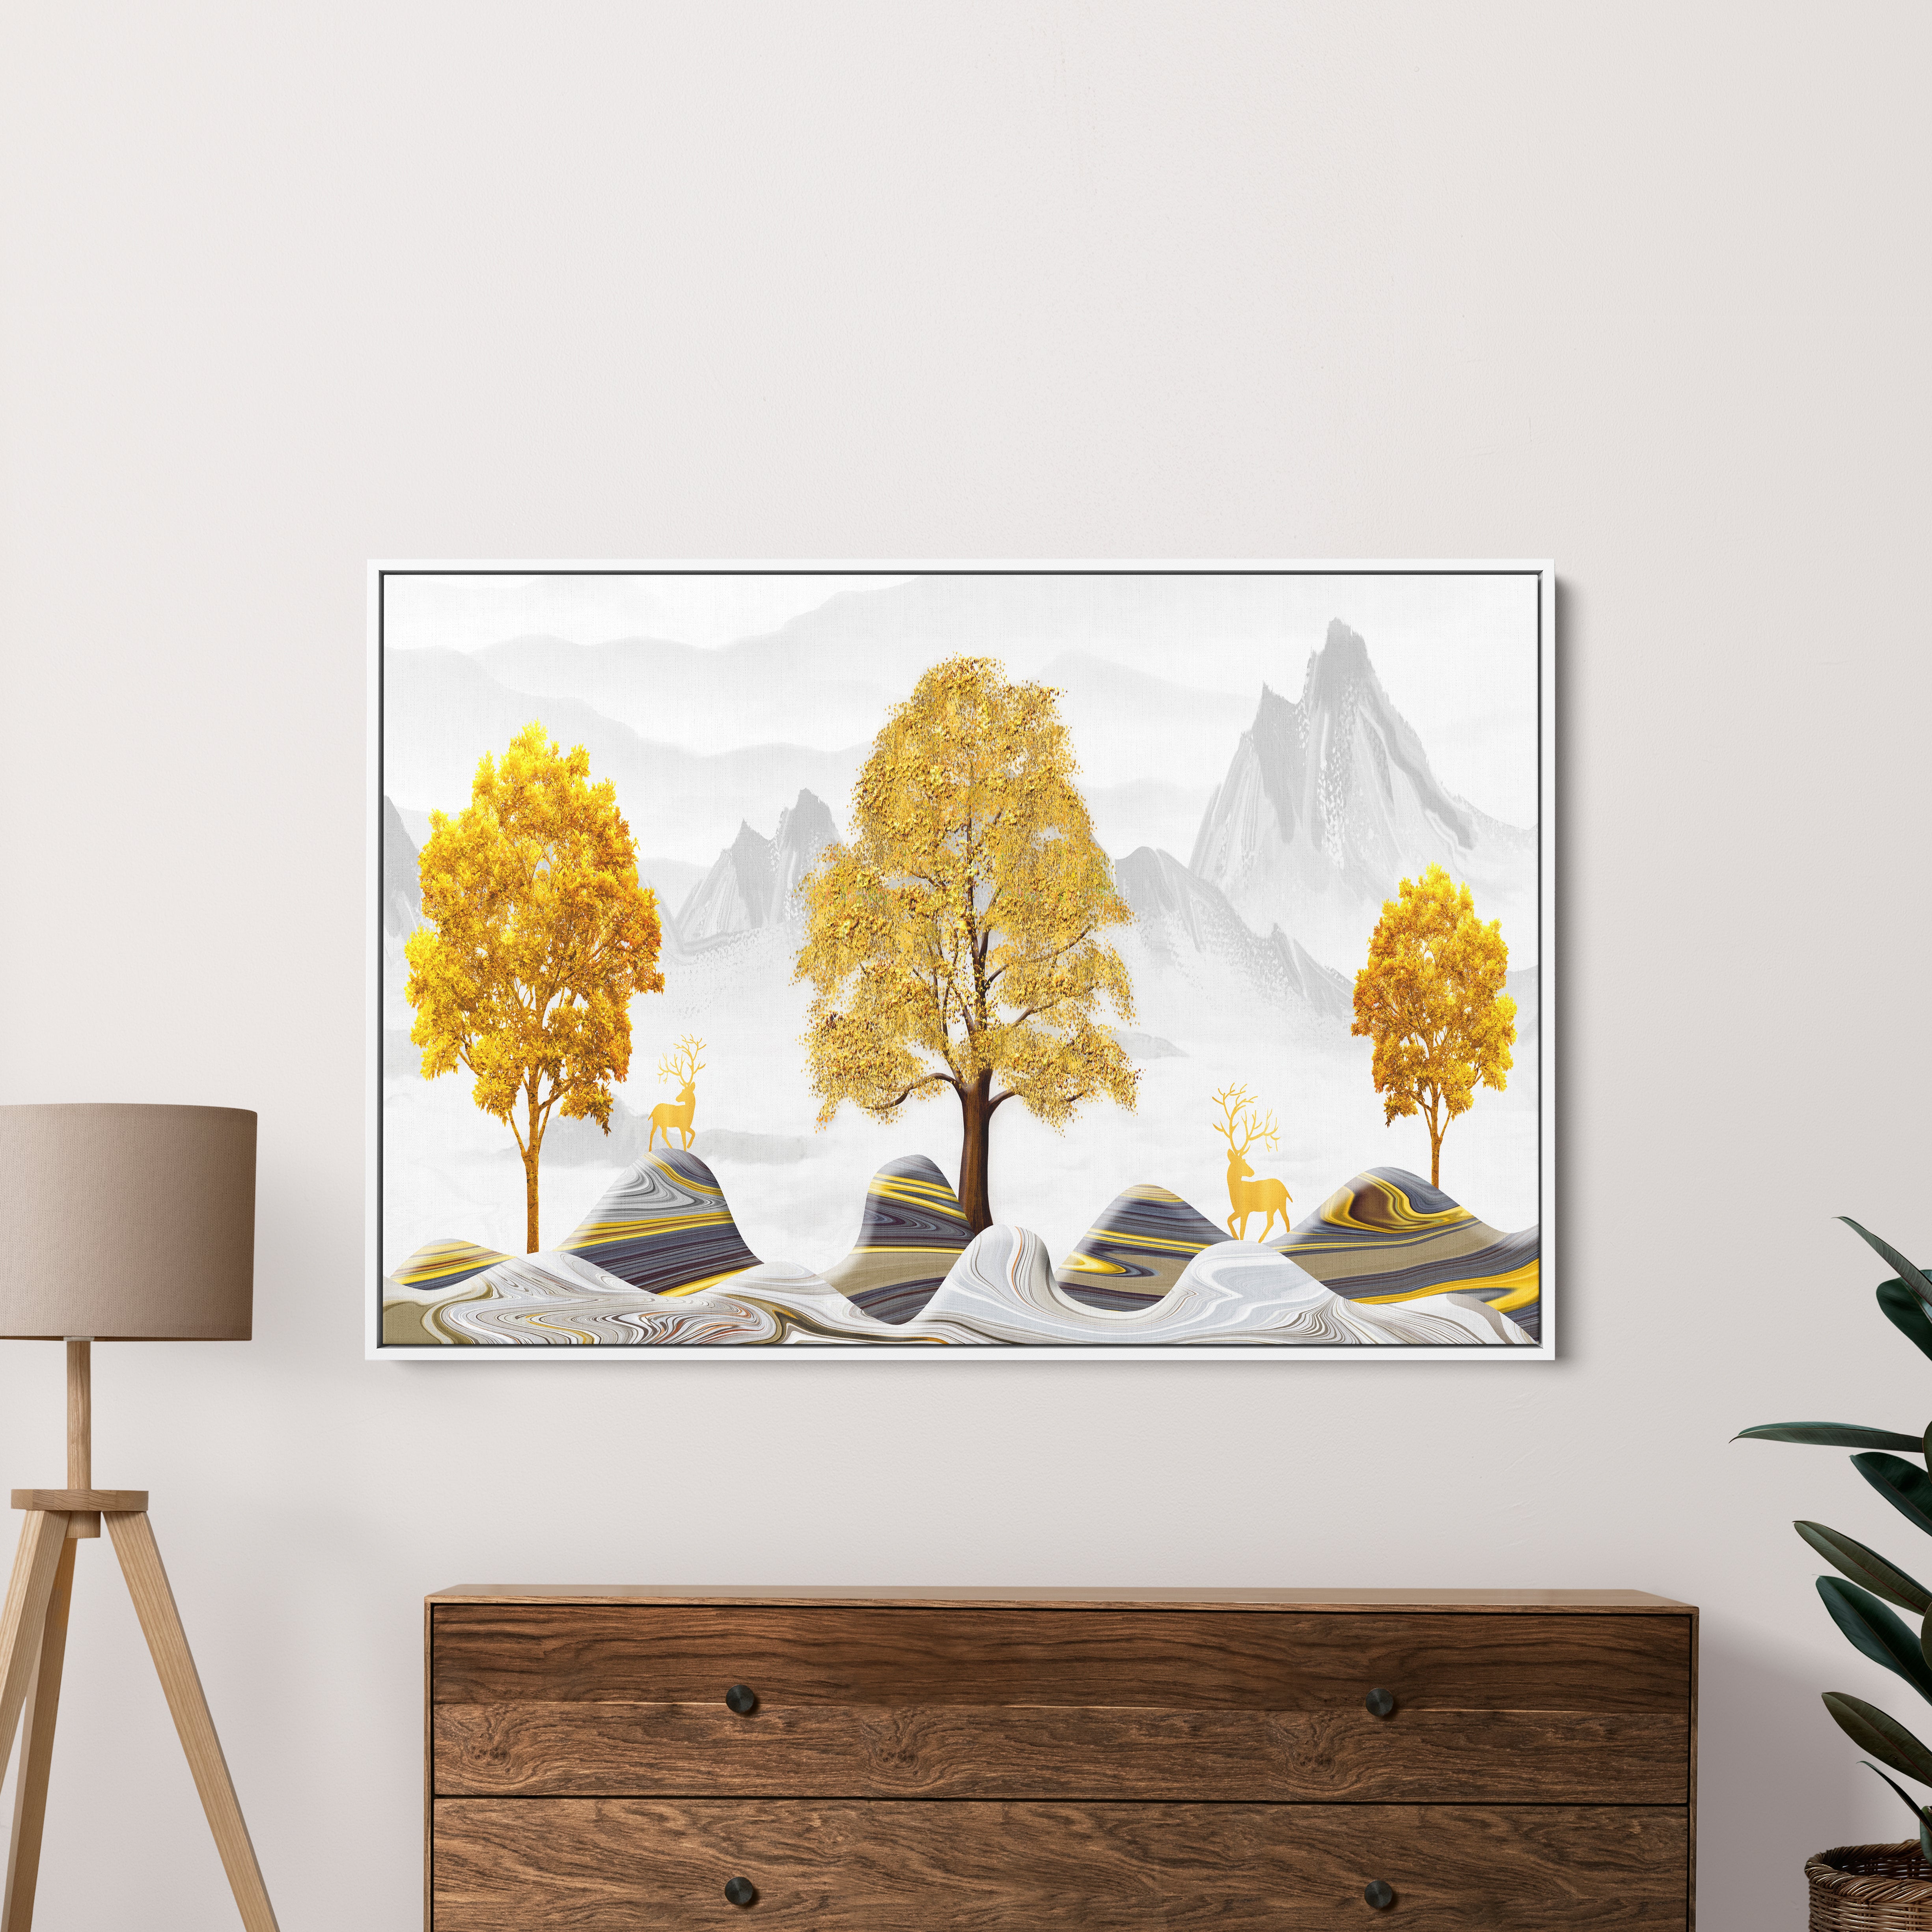 Colorful Rocks And Golden Tree With Deers Canvas Wall Painting